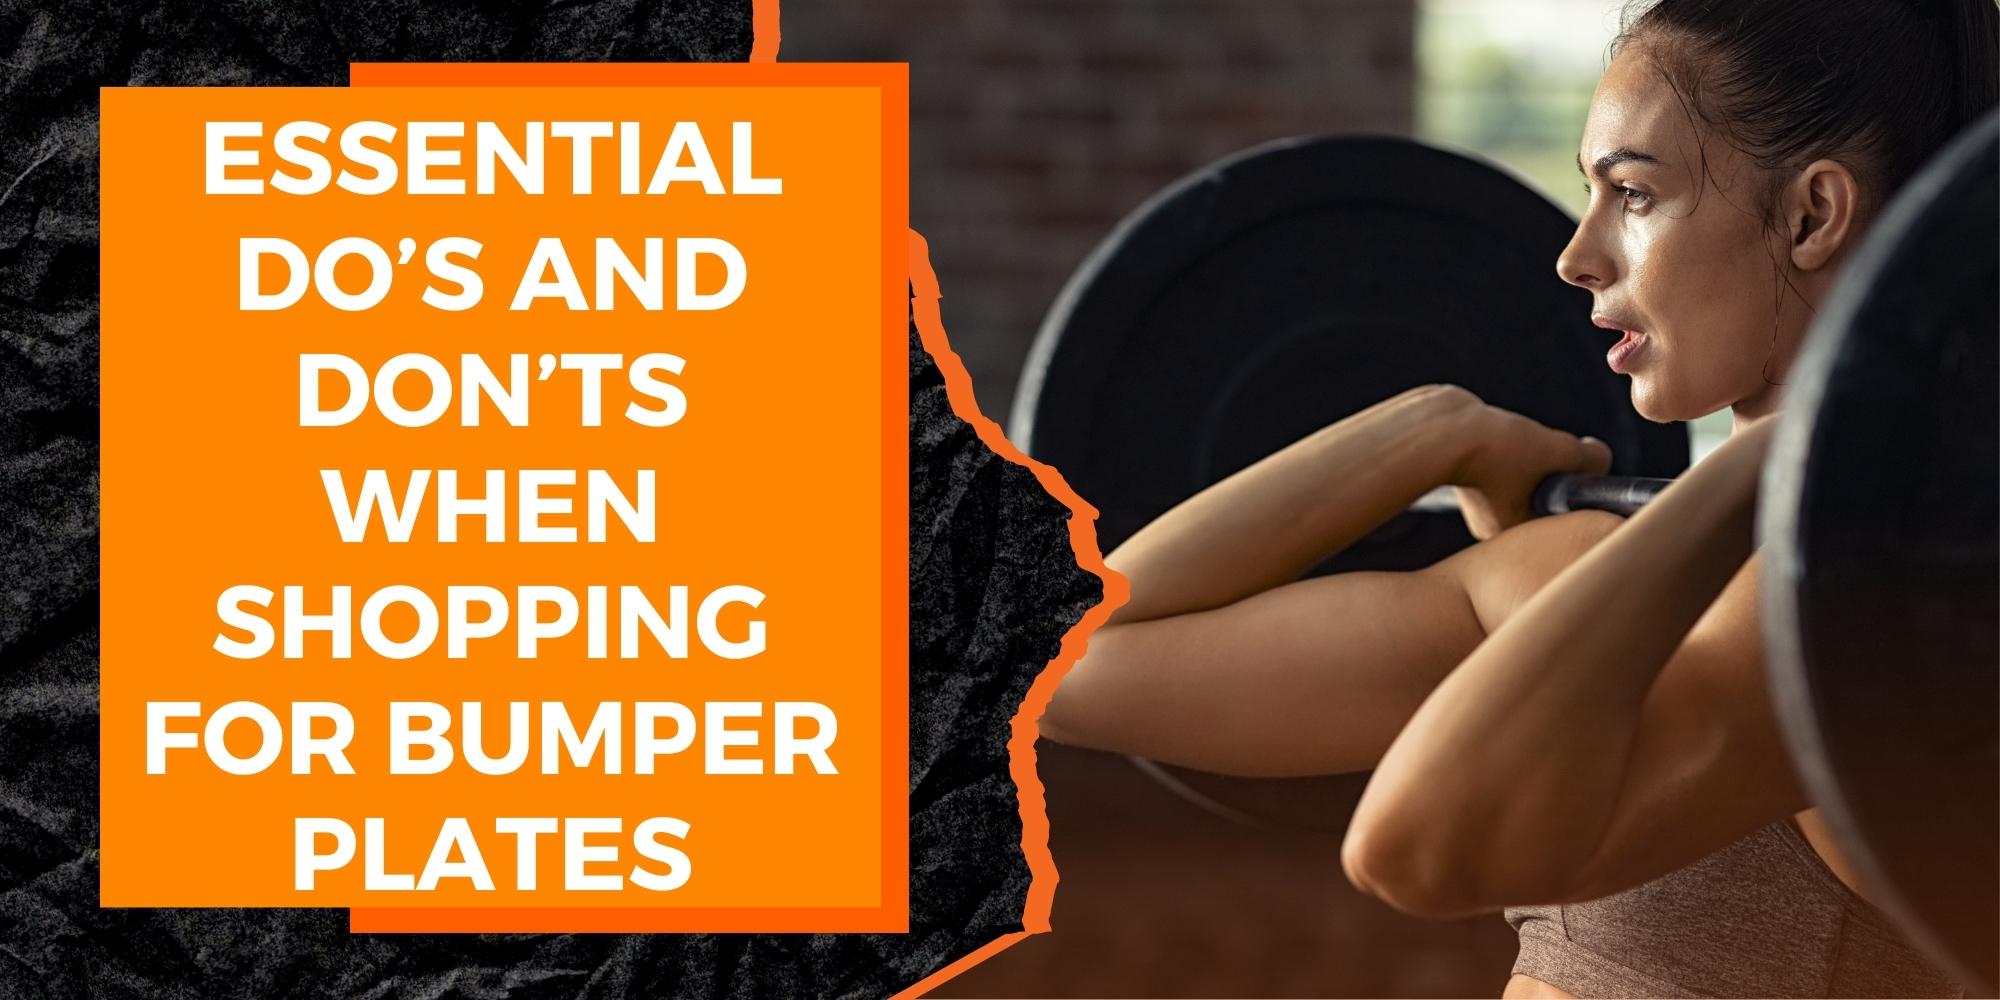 Essential Do’s and Don’ts When Shopping for Bumper Plates